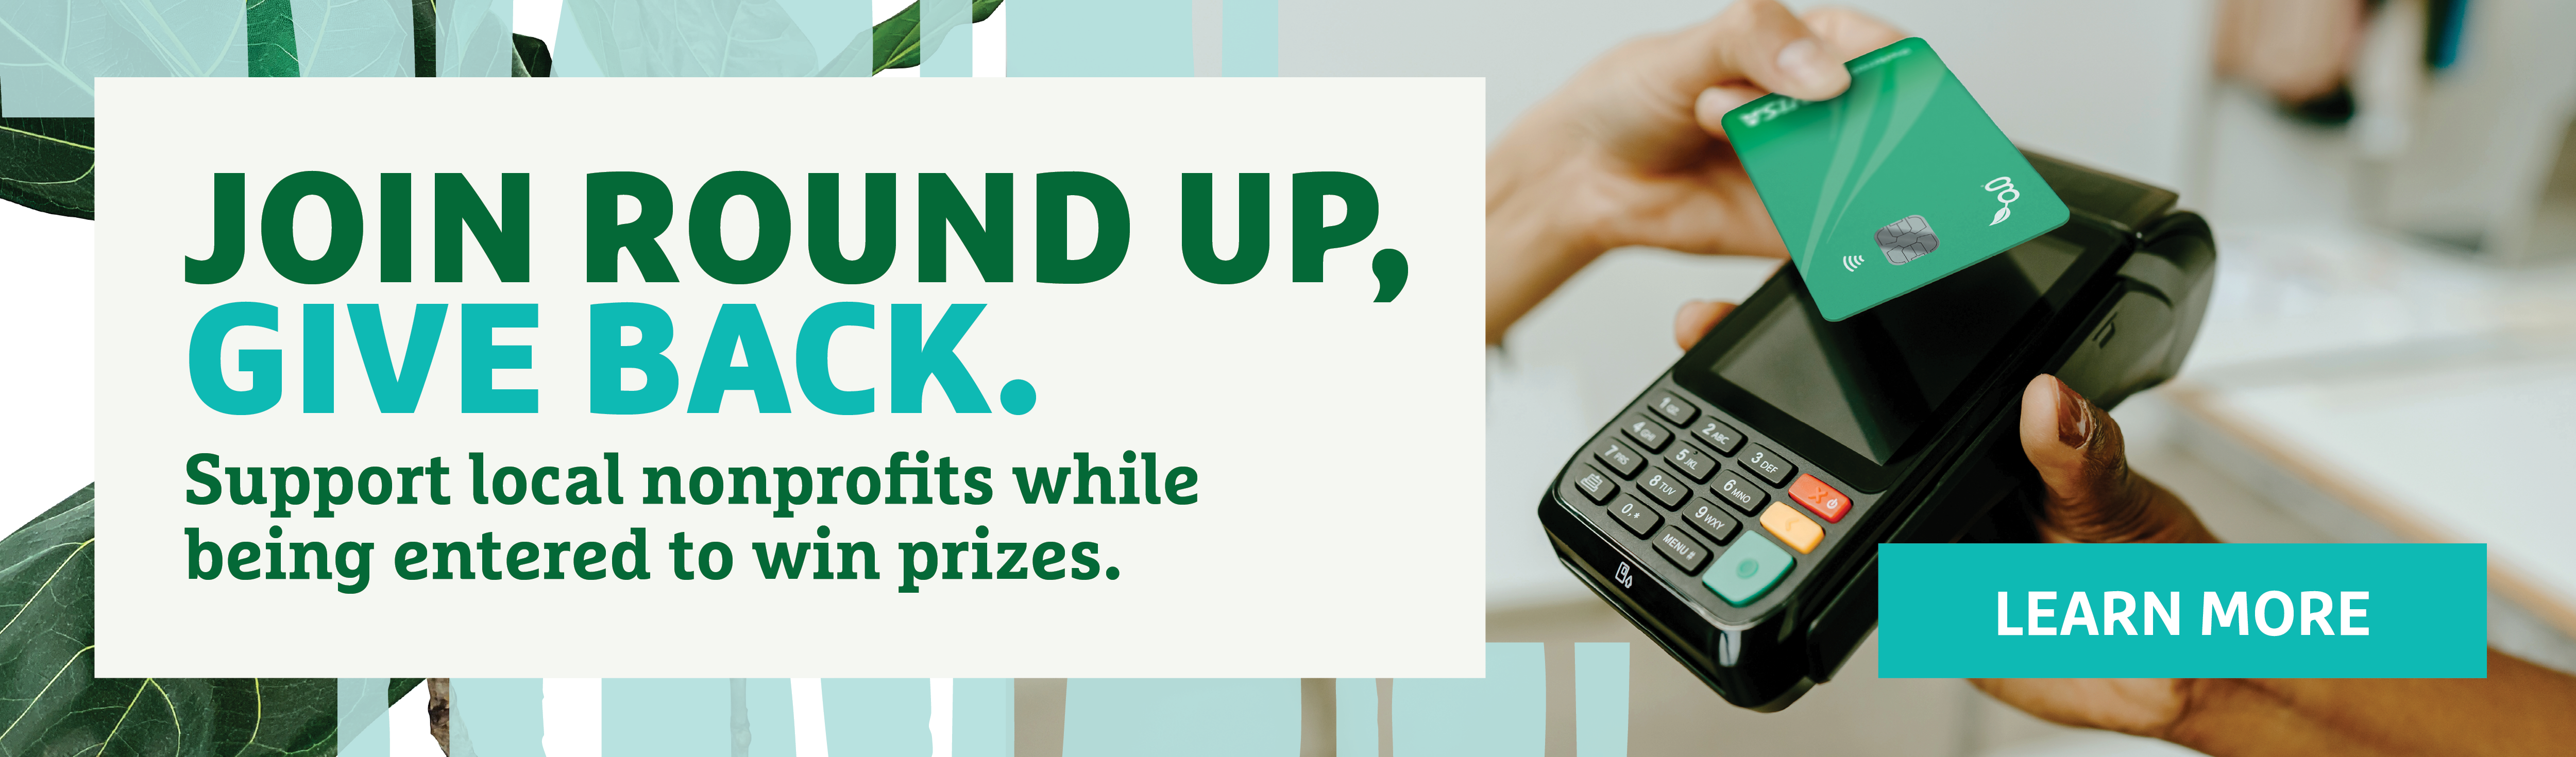 Join Round Up, Give Back. Support local nonprofits while being entered to win prizes.